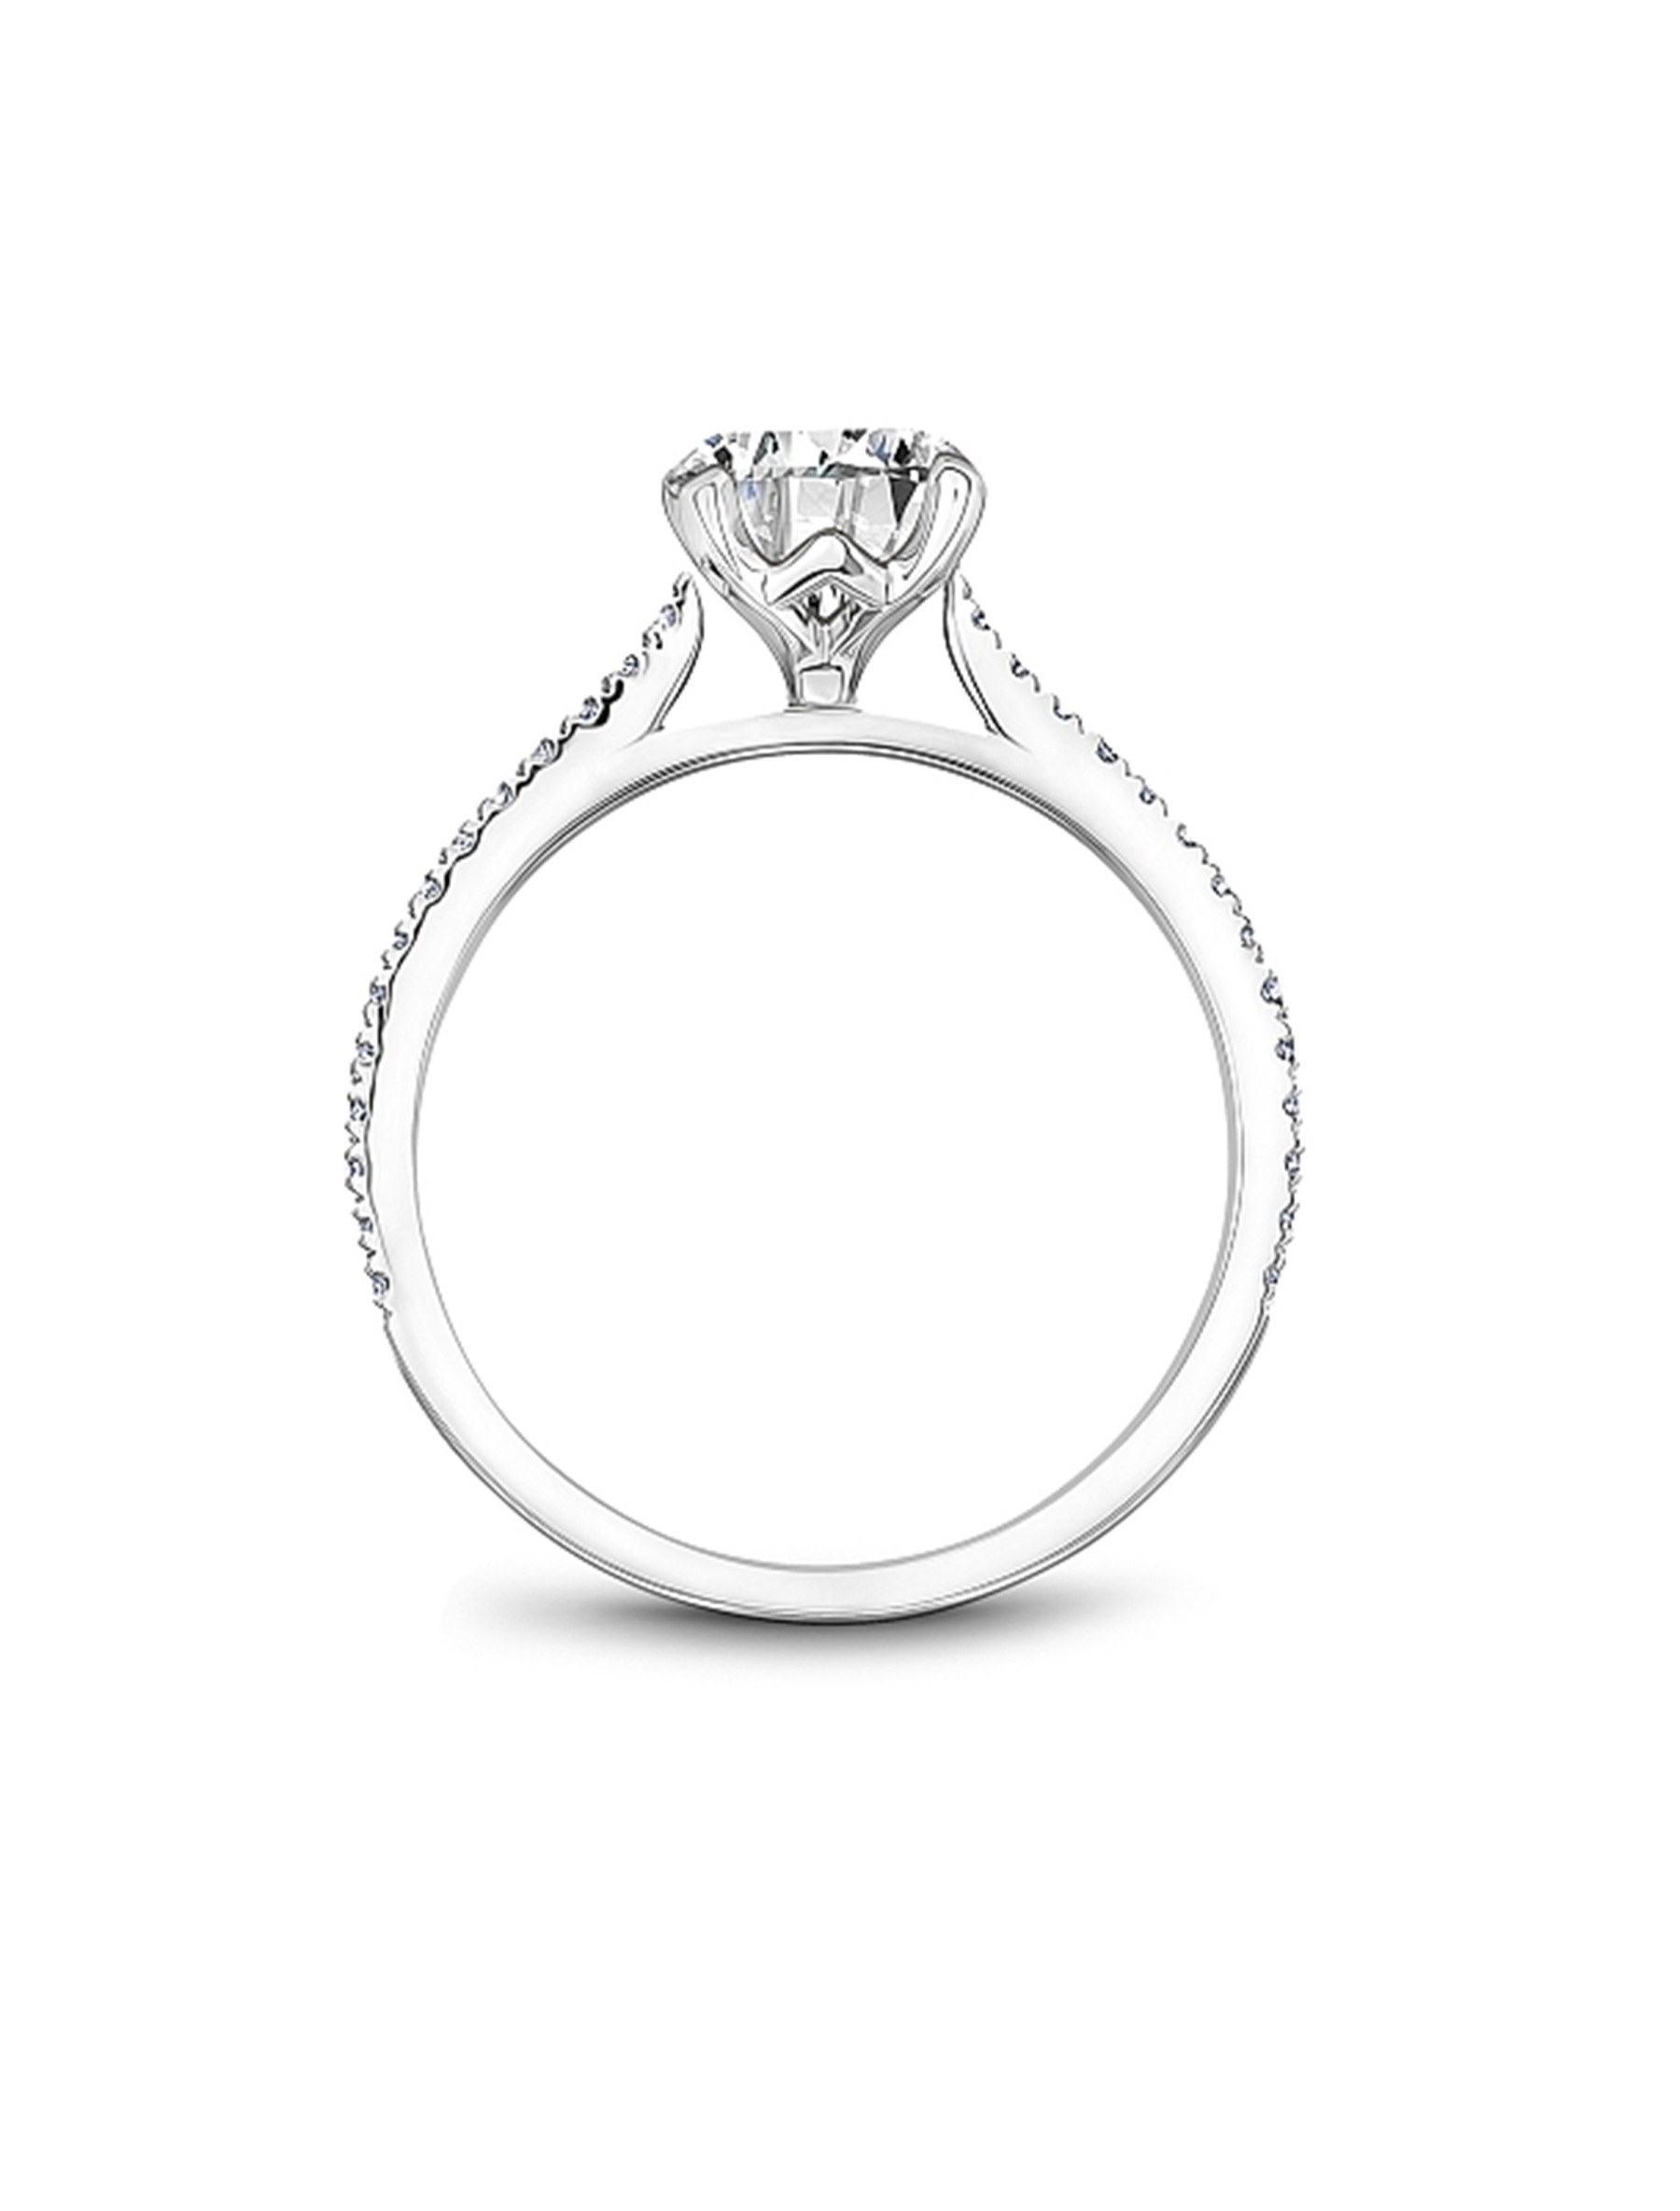 Noam Carver Pave Diamond Engagement Ring Setting in 18K White Gold side view